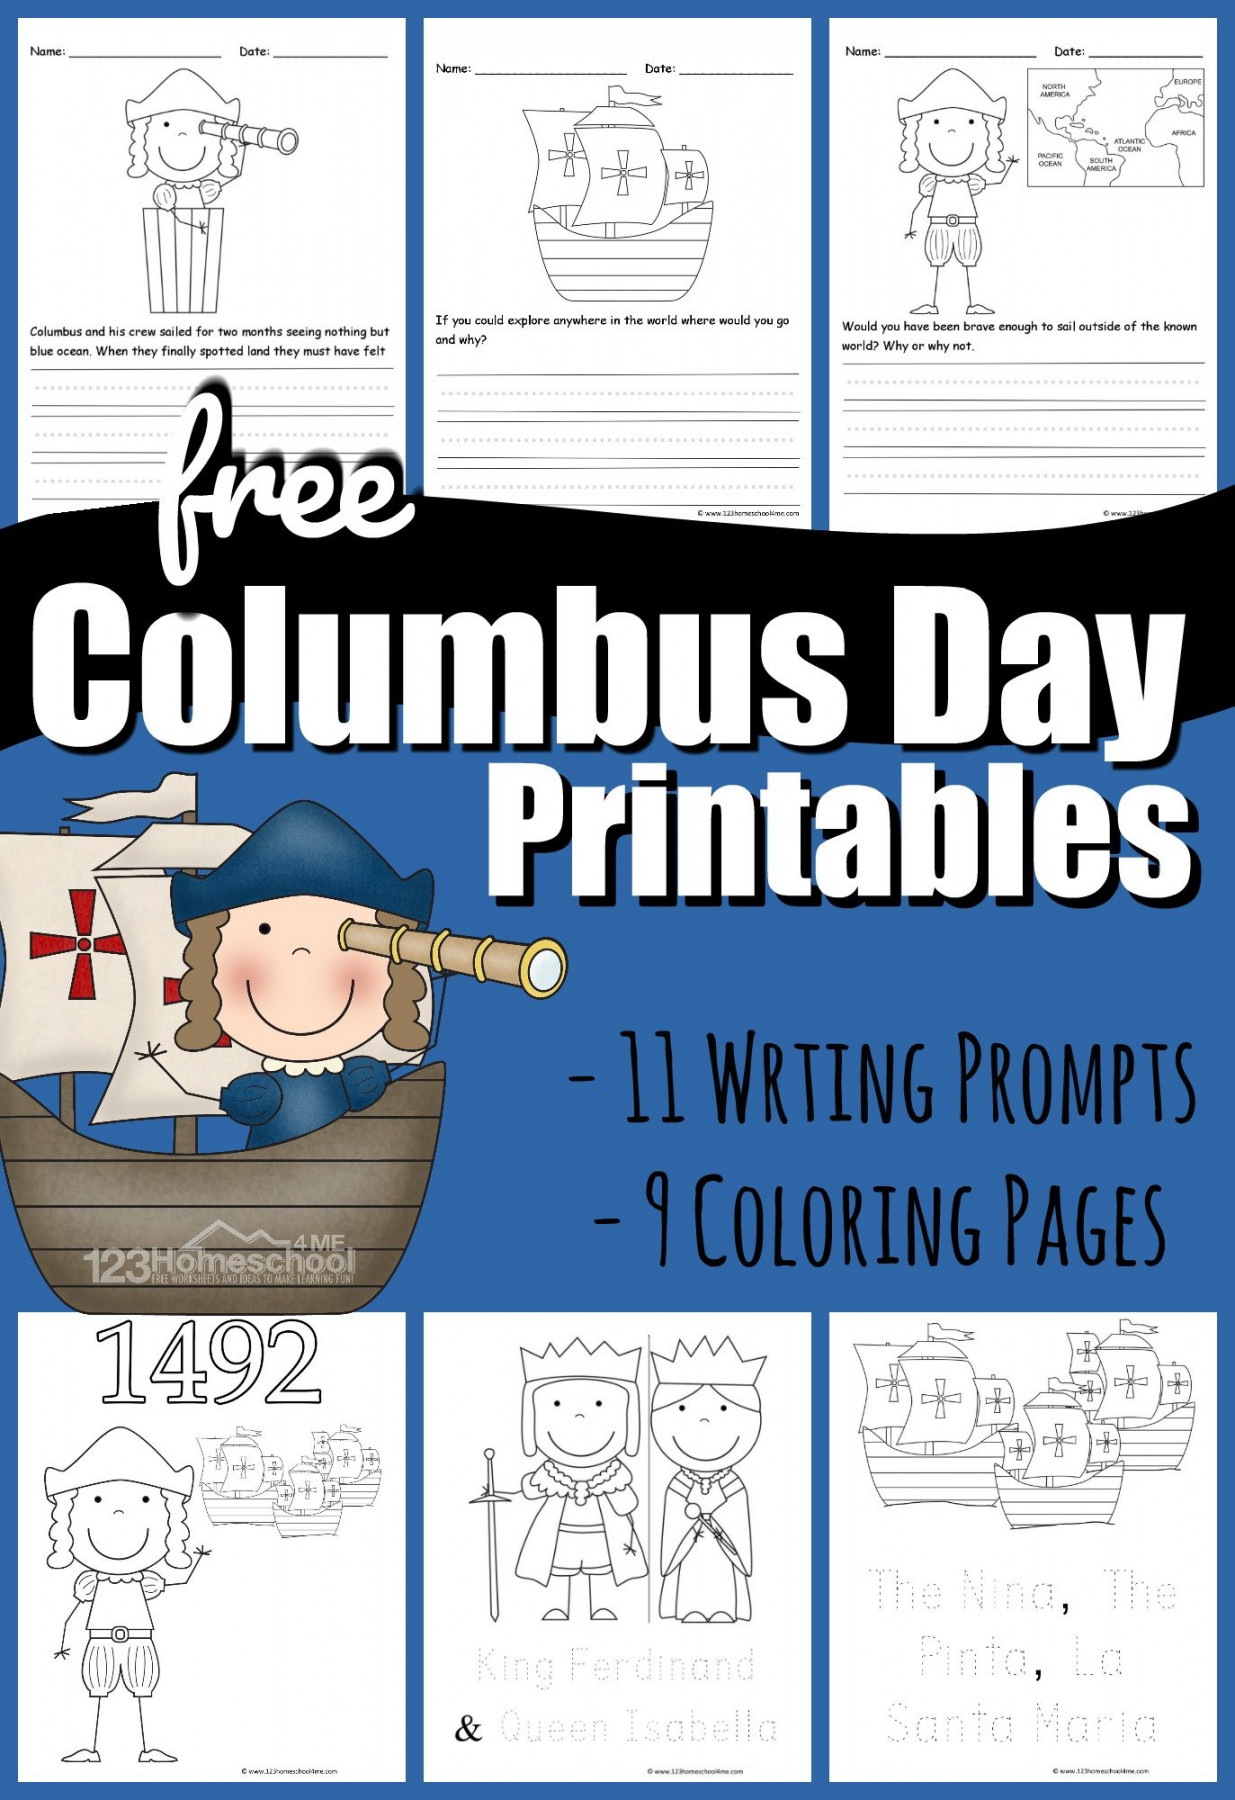 FREE Columbus Day Coloring Pages & Writing Prompt Worksheets